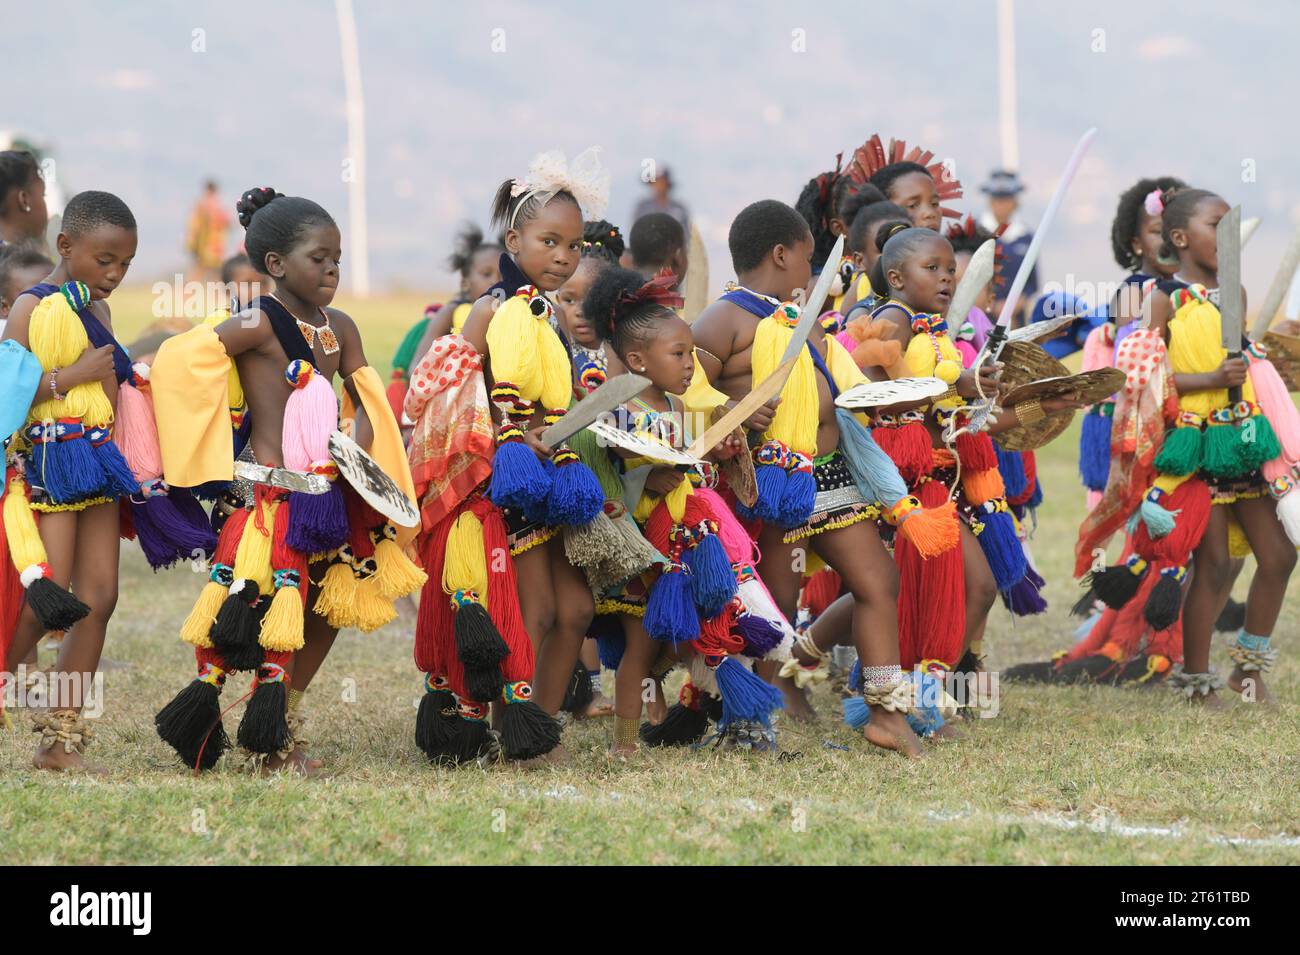 Culture event, group of female children dancing in Umhlanga reed dance festival 2023, Kingdom of Eswatini, African cultural activity, young girls Stock Photo